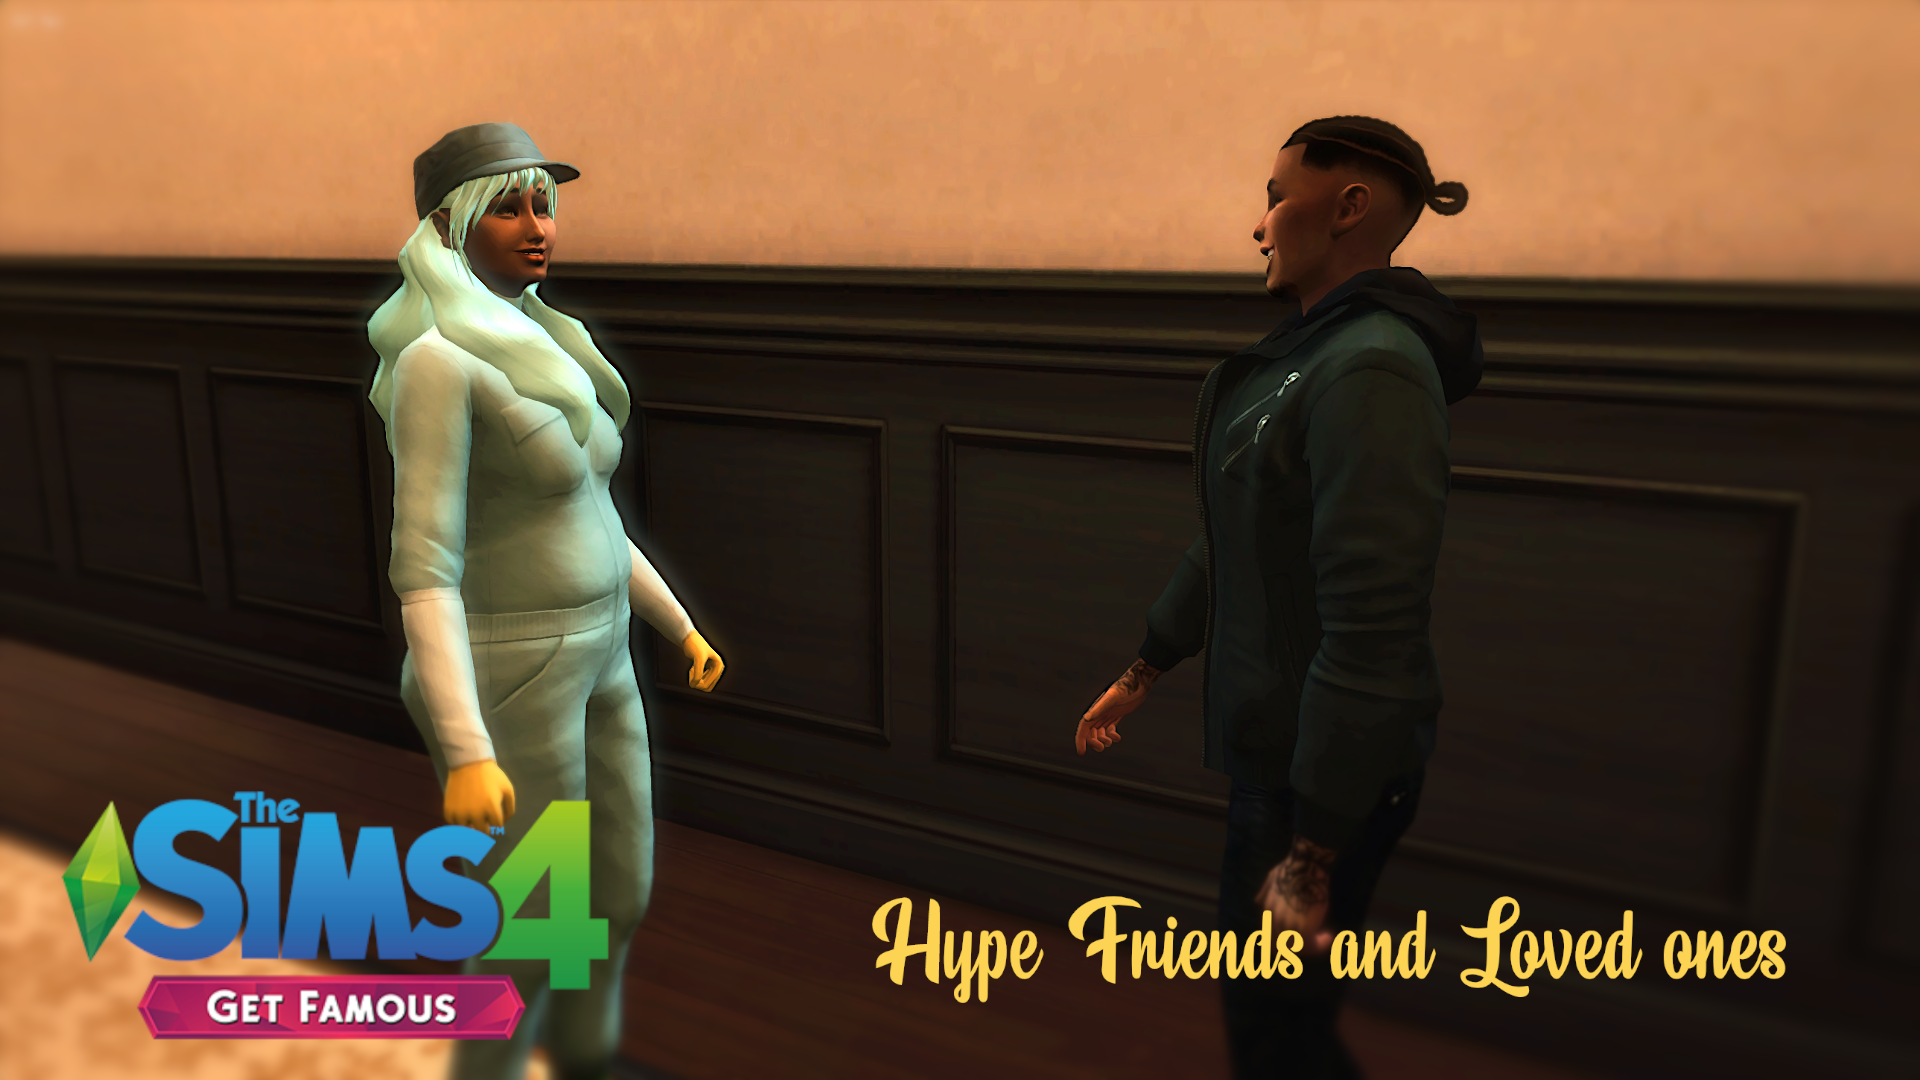 SIMS 4 IS FREE NOW! PLAY WITH FRIENDS WITH MULTIPLAYER MOD (SETUP) 